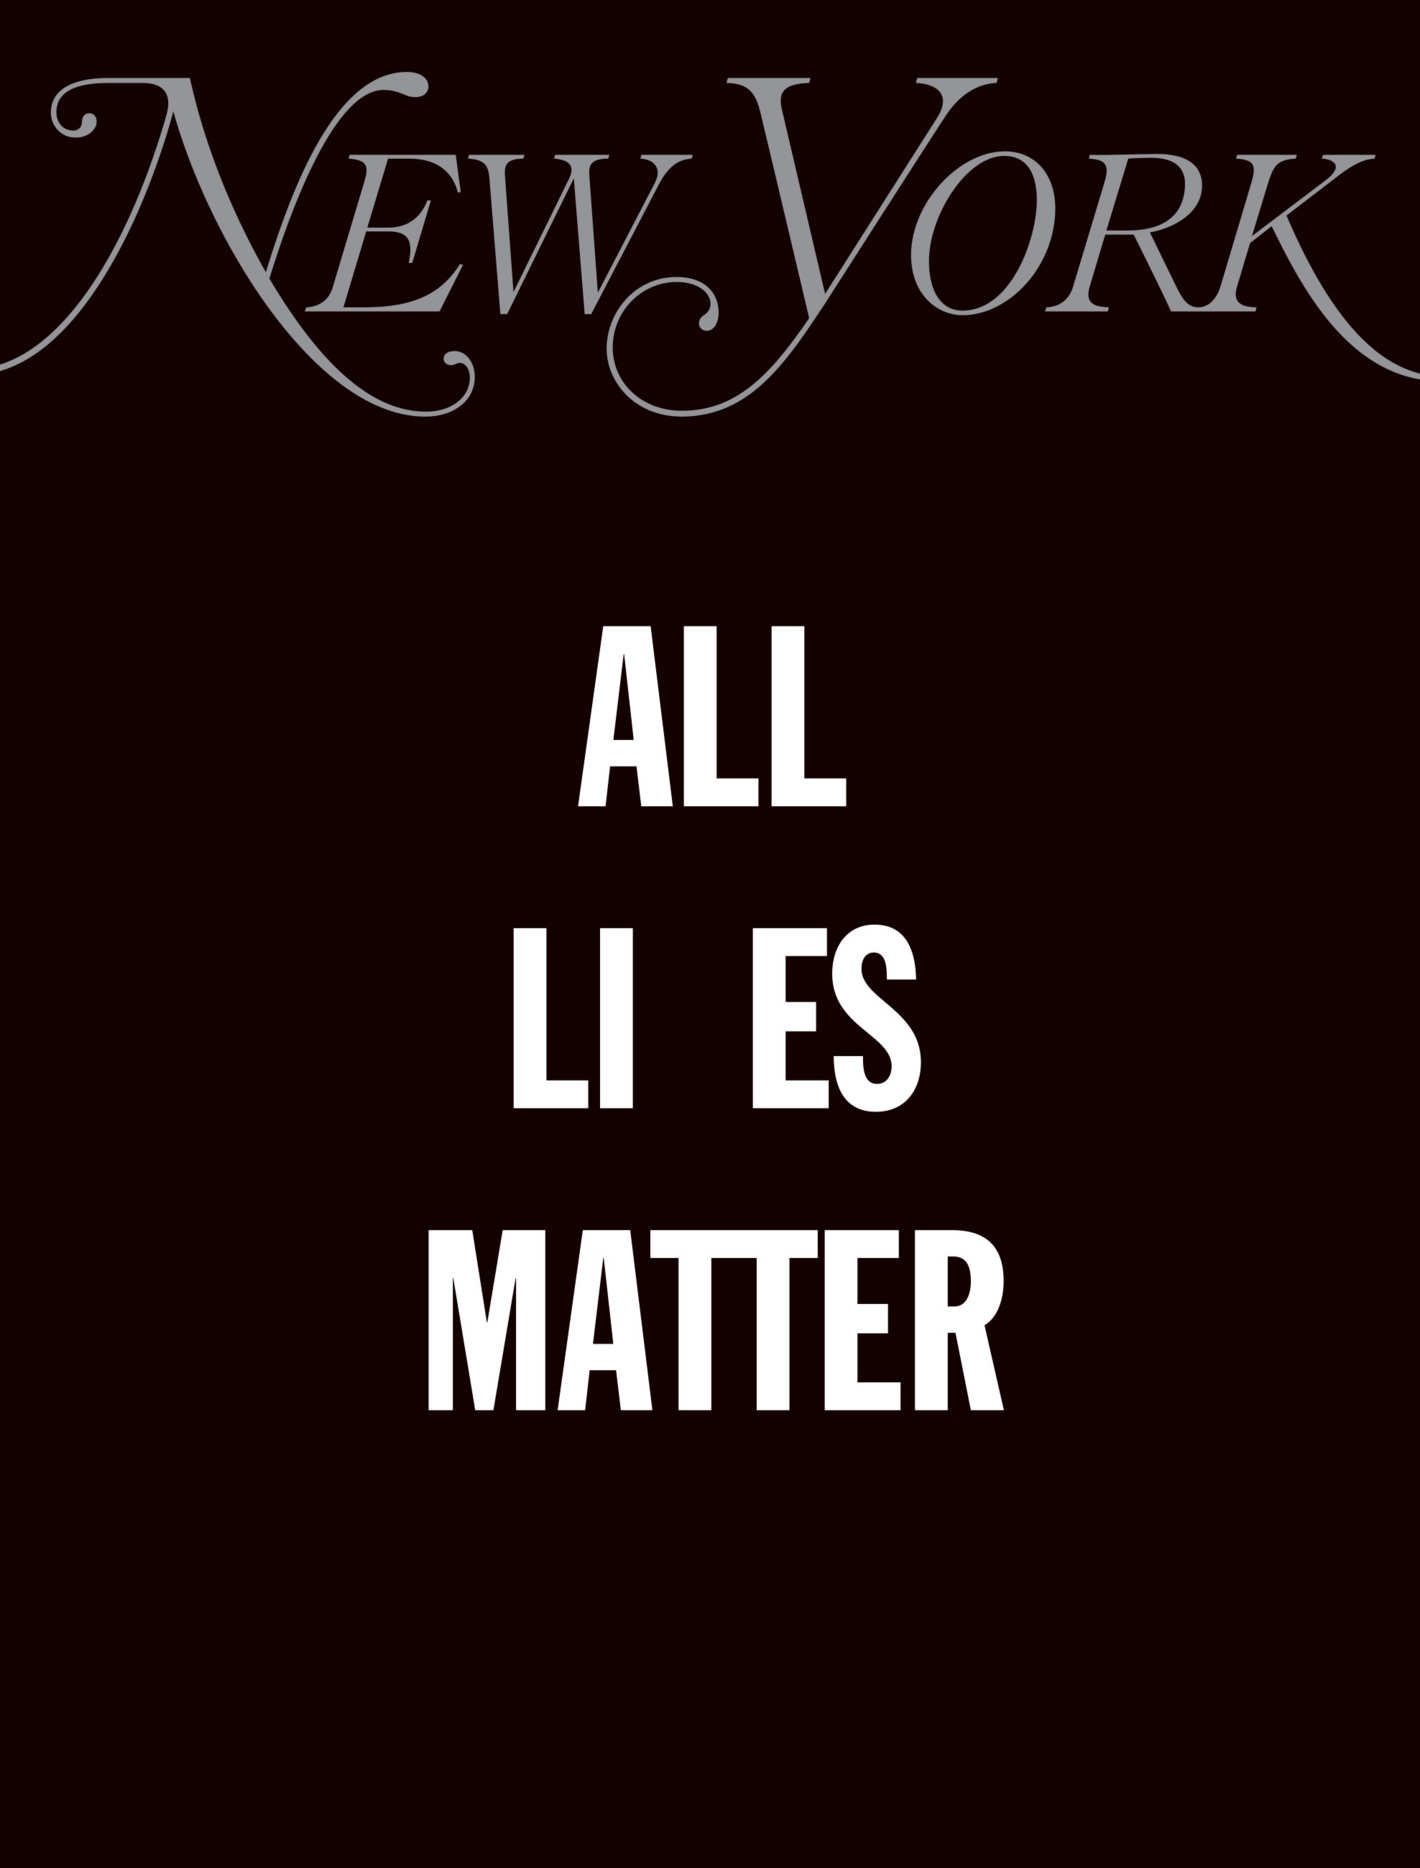 magazine cover with the text "ALL LI ES MATTER"